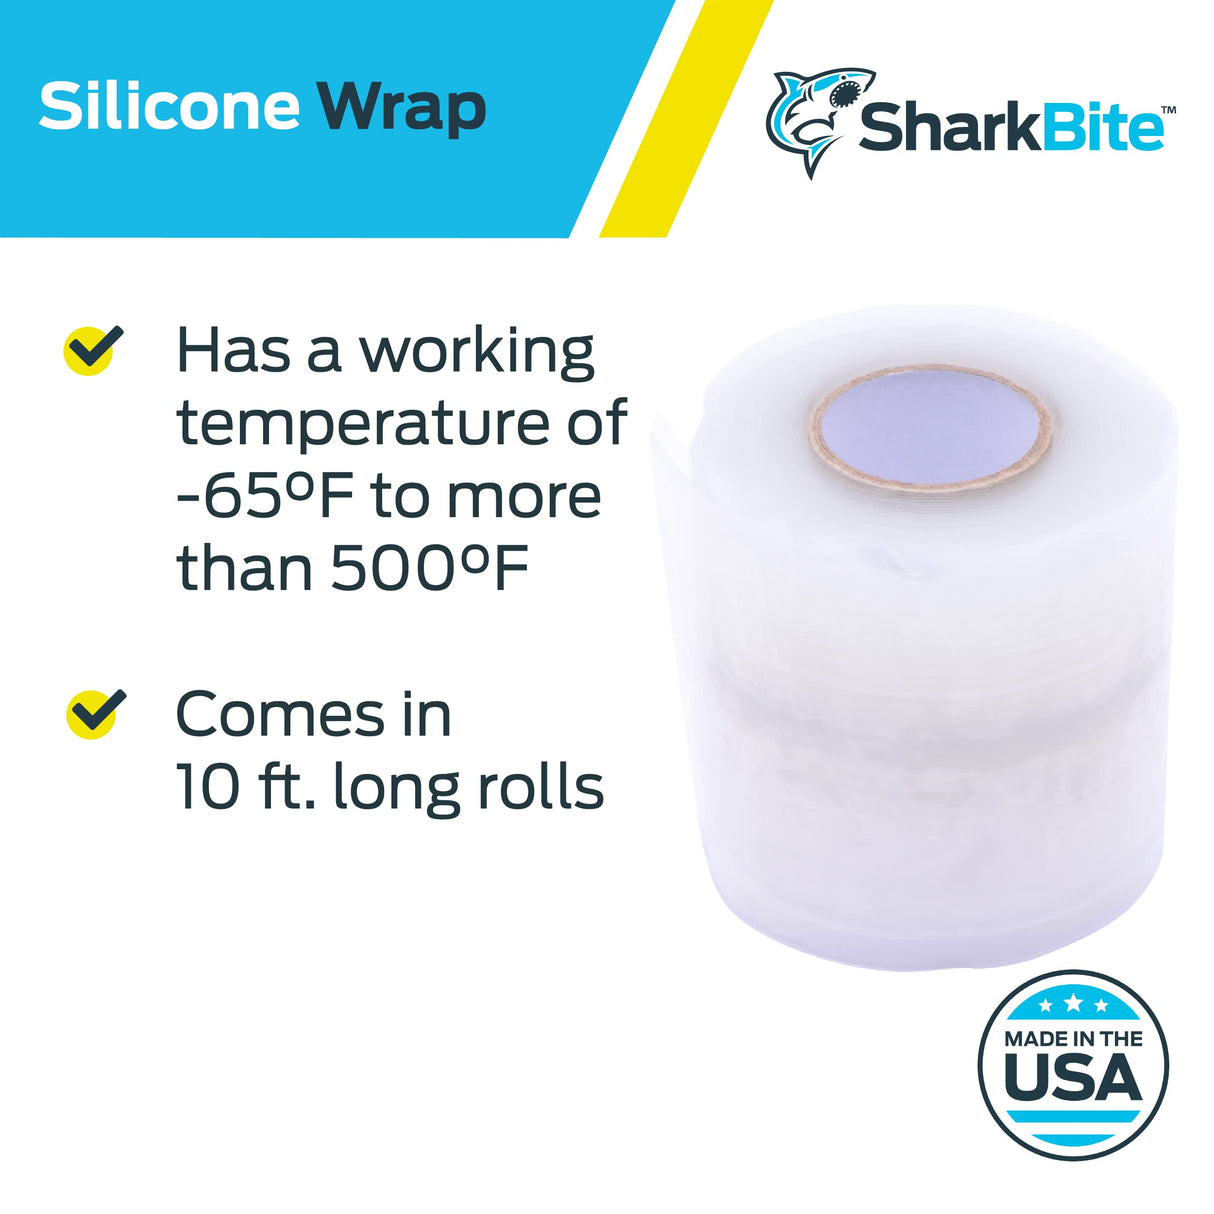 SharkBite Silicone Pipe Wrap (10 ft. x 2 in.)